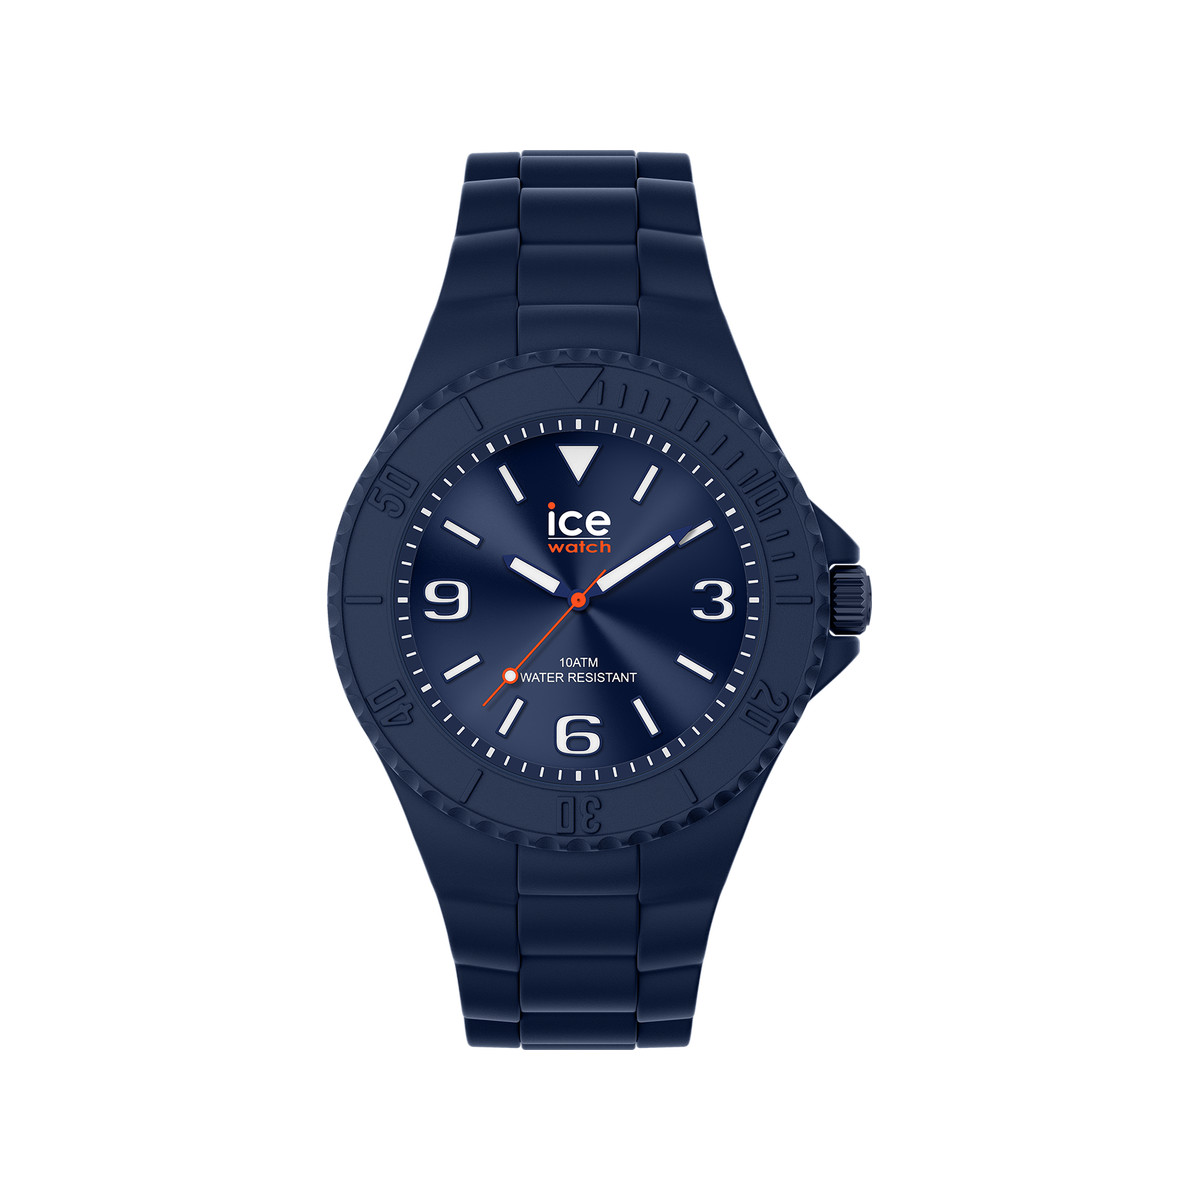 Montre Ice Watch  Homme silicone bleu.